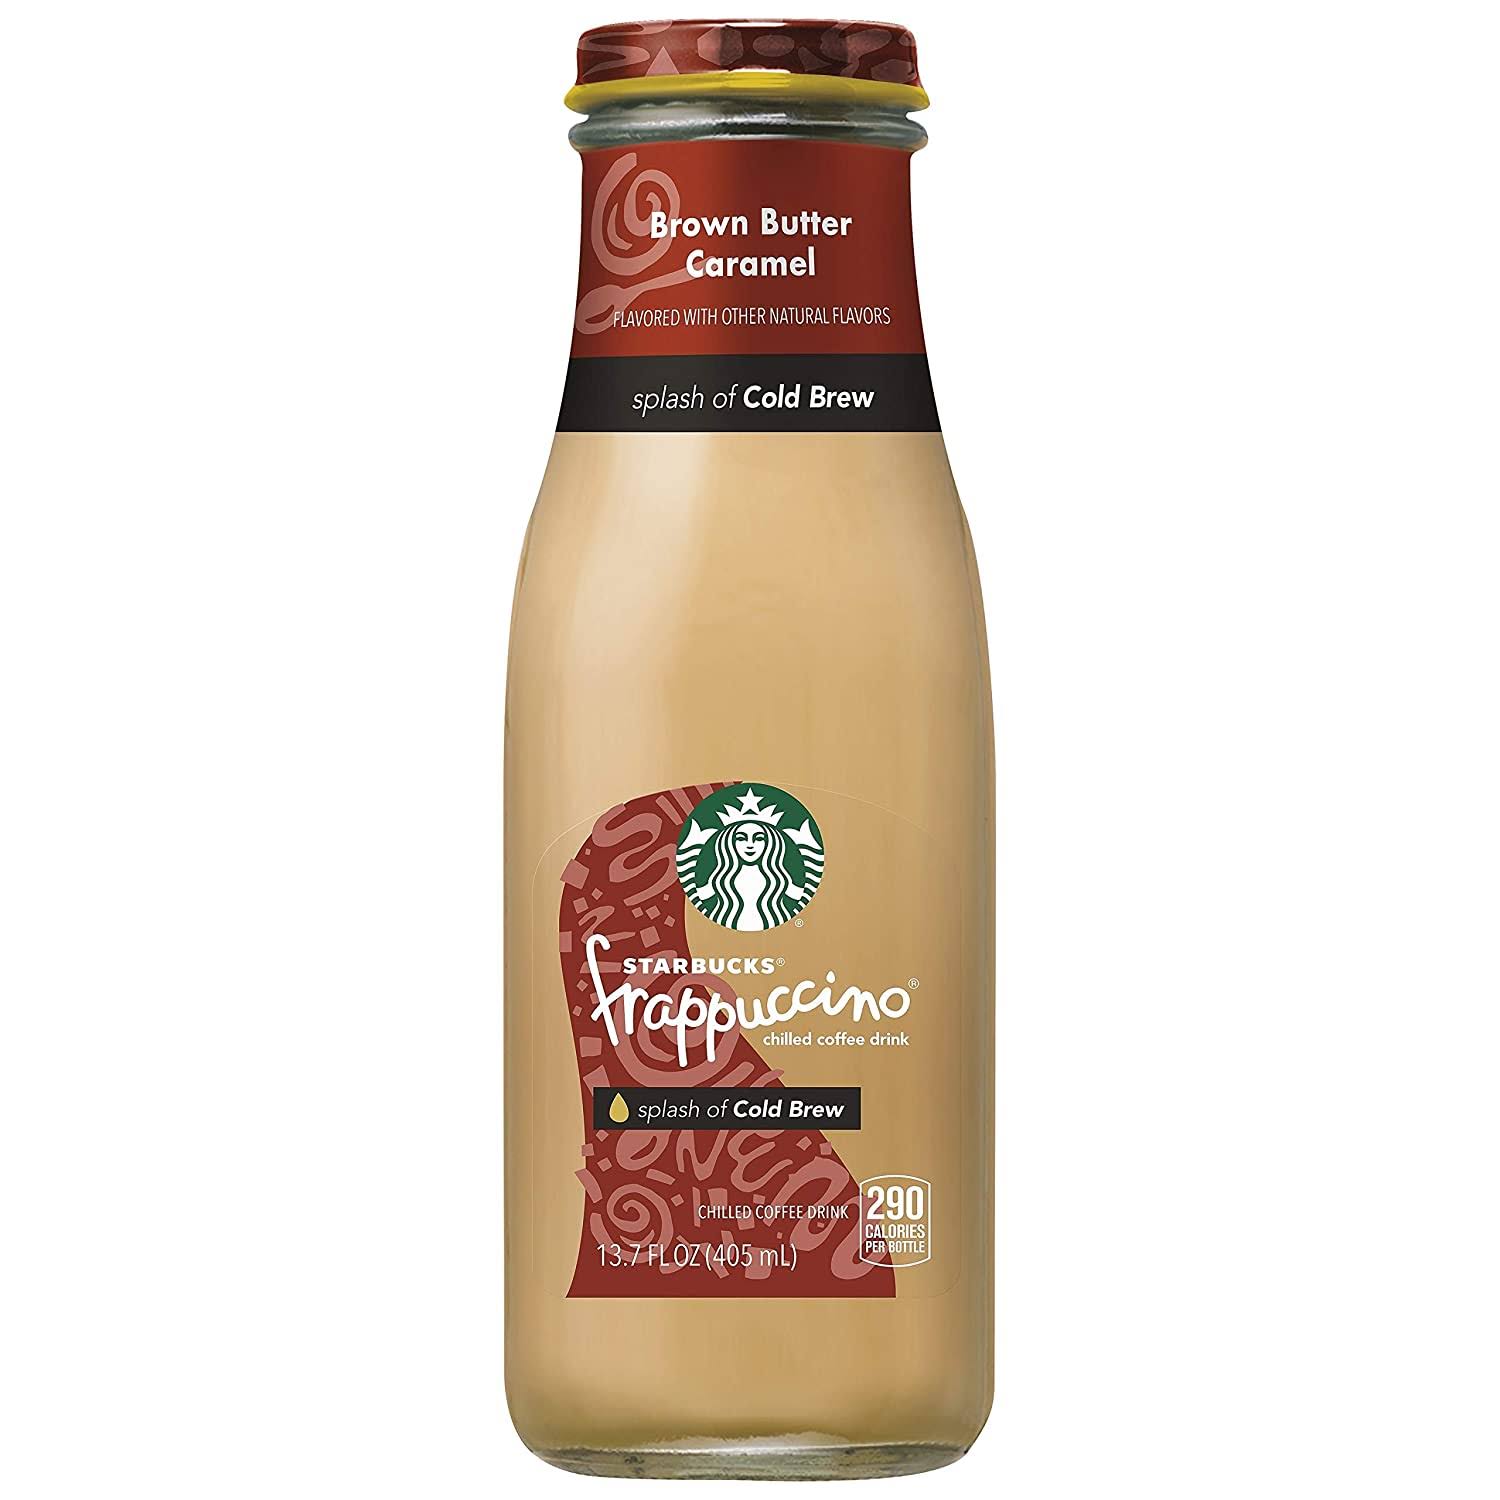 Starbucks Frappuccino Coffee Drink, Chilled,Brown Butter Caramel - 13.7 fl oz